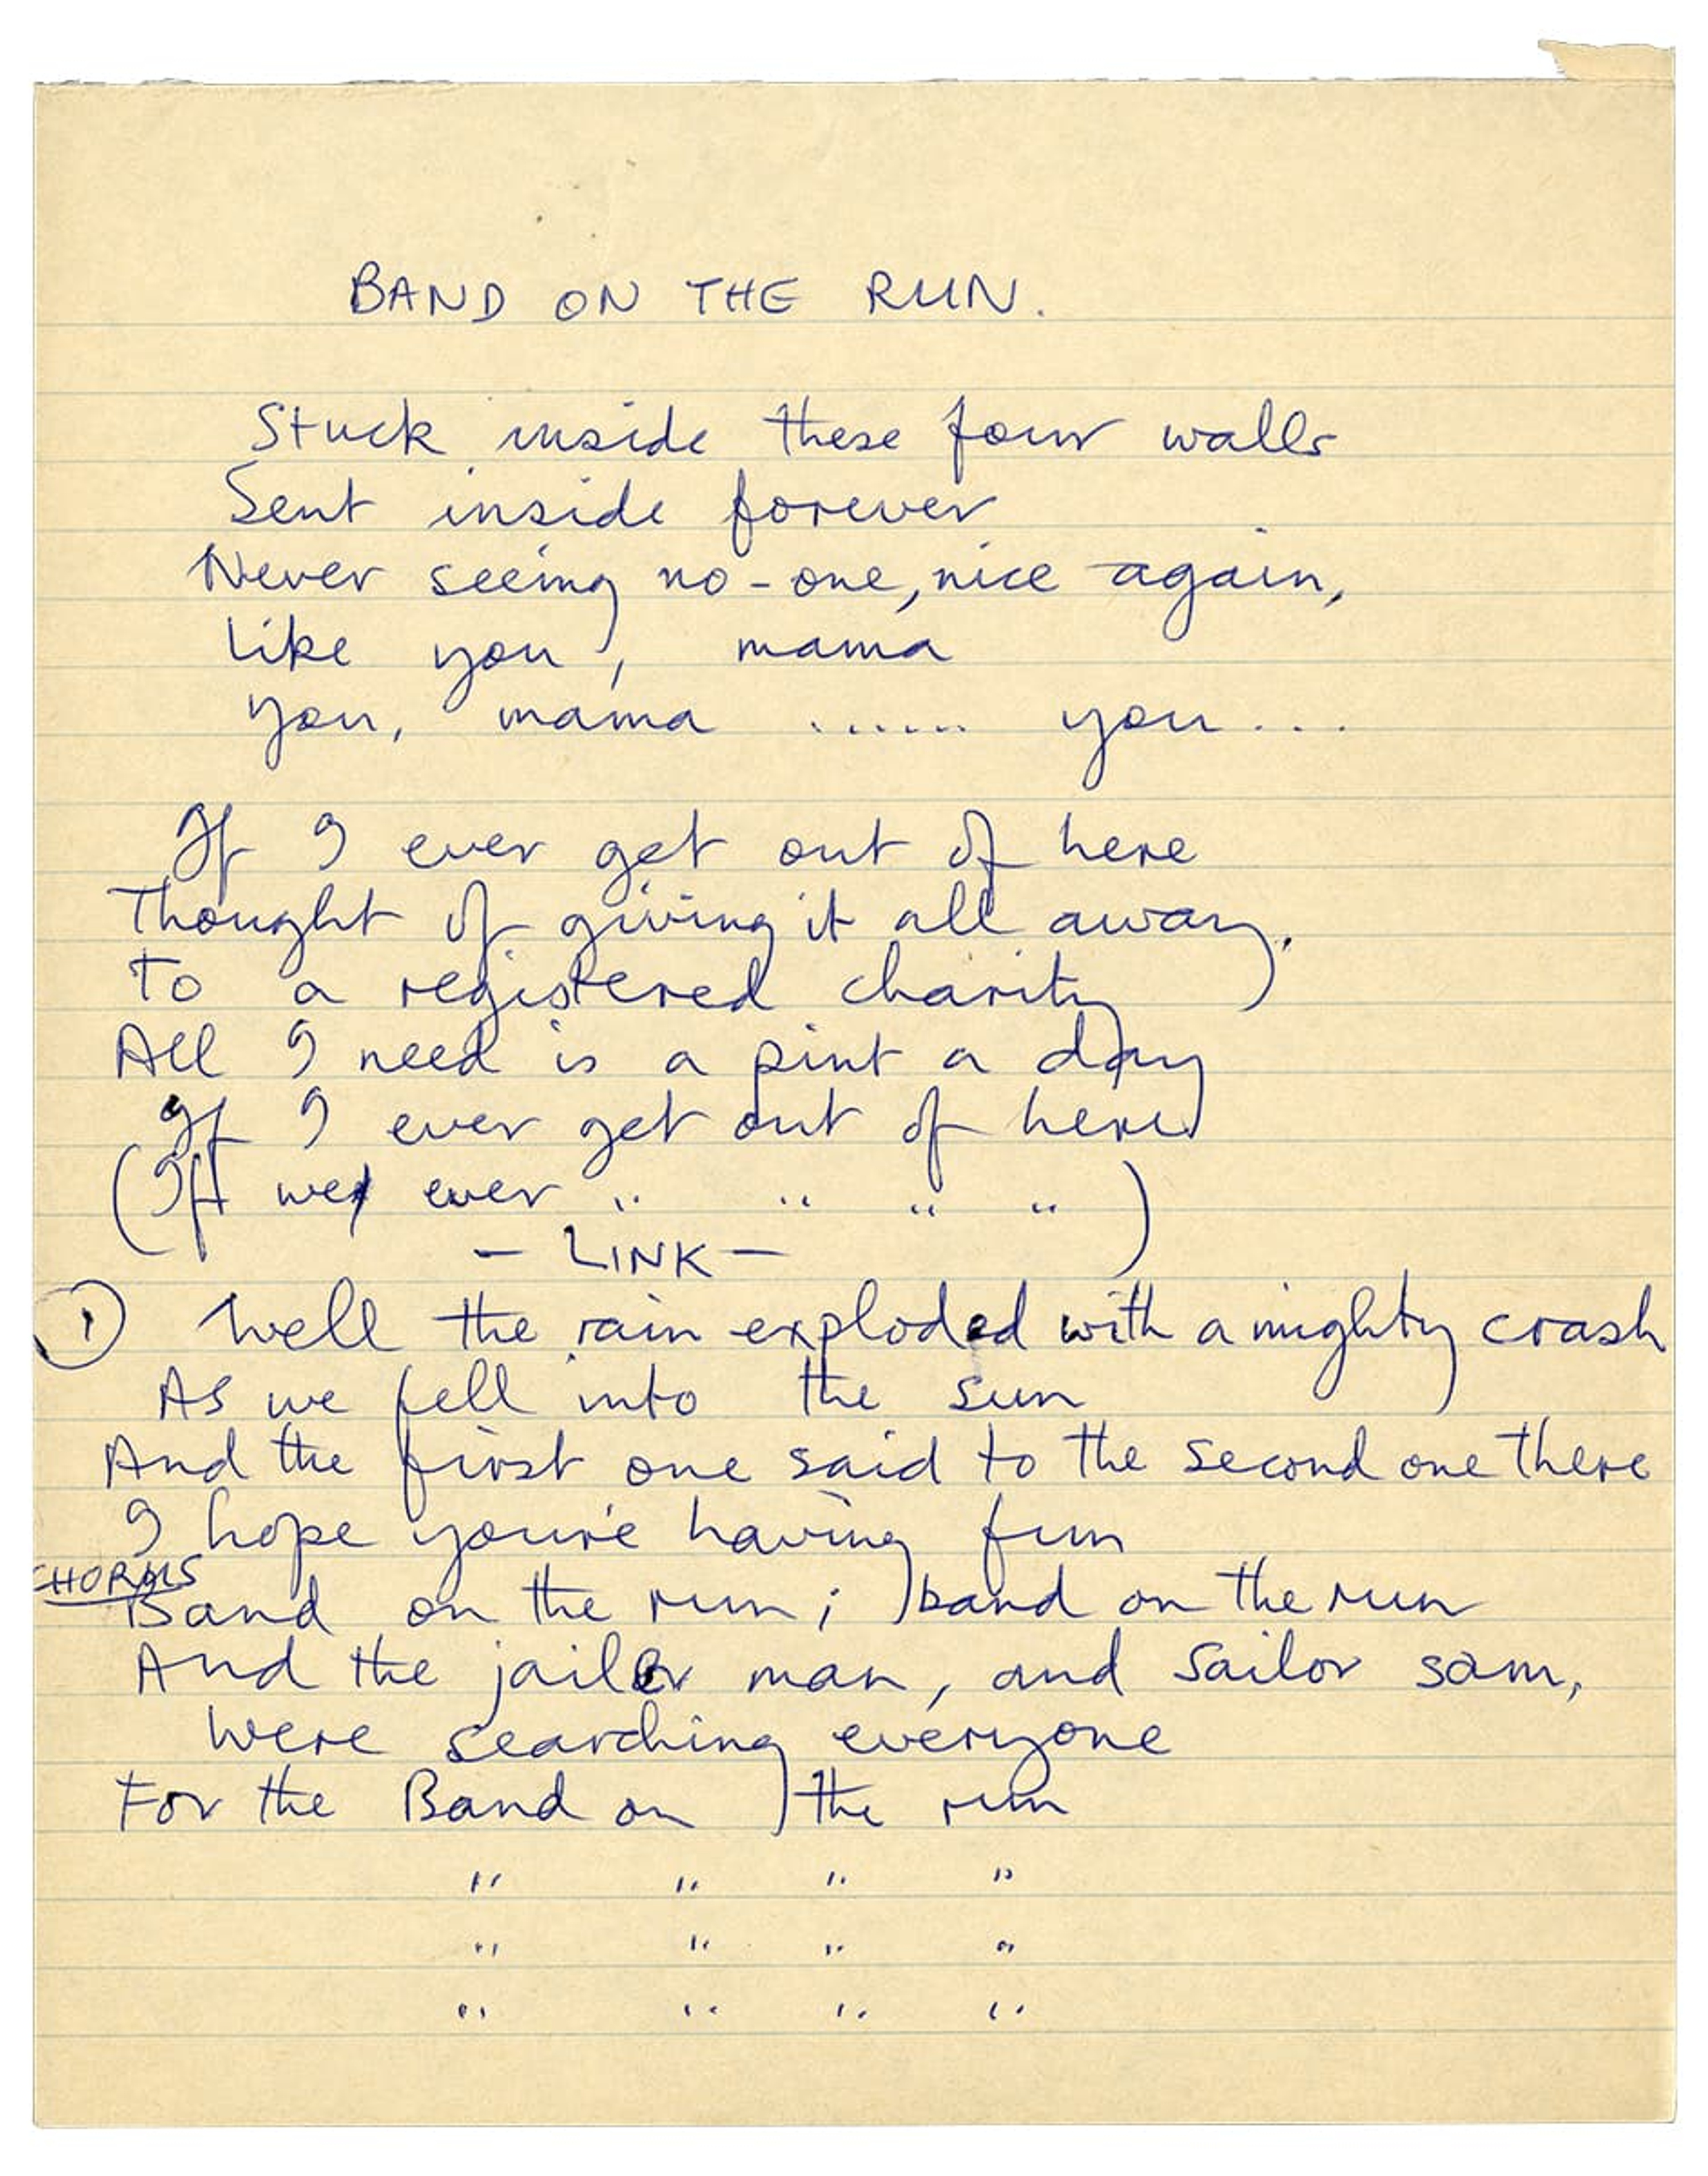 Handwritten lyrics for 'Band On The Run'. Lyrics read: Stuck inside these four walls Sent inside forever Never seeing no one Nice again Like you, Mama You, Mama You If I ever get out of here Thought of giving it all away To a registered charity All I need is a pint a day If I ever get outta here (If we ever get outta here) Well, the rain exploded with a mighty crash As we fell into the sun And the first one said to the second one there "I hope you're having fun" Band on the run, band on the run And the jailer man and sailor Sam Were searching everyone For the band on the run...